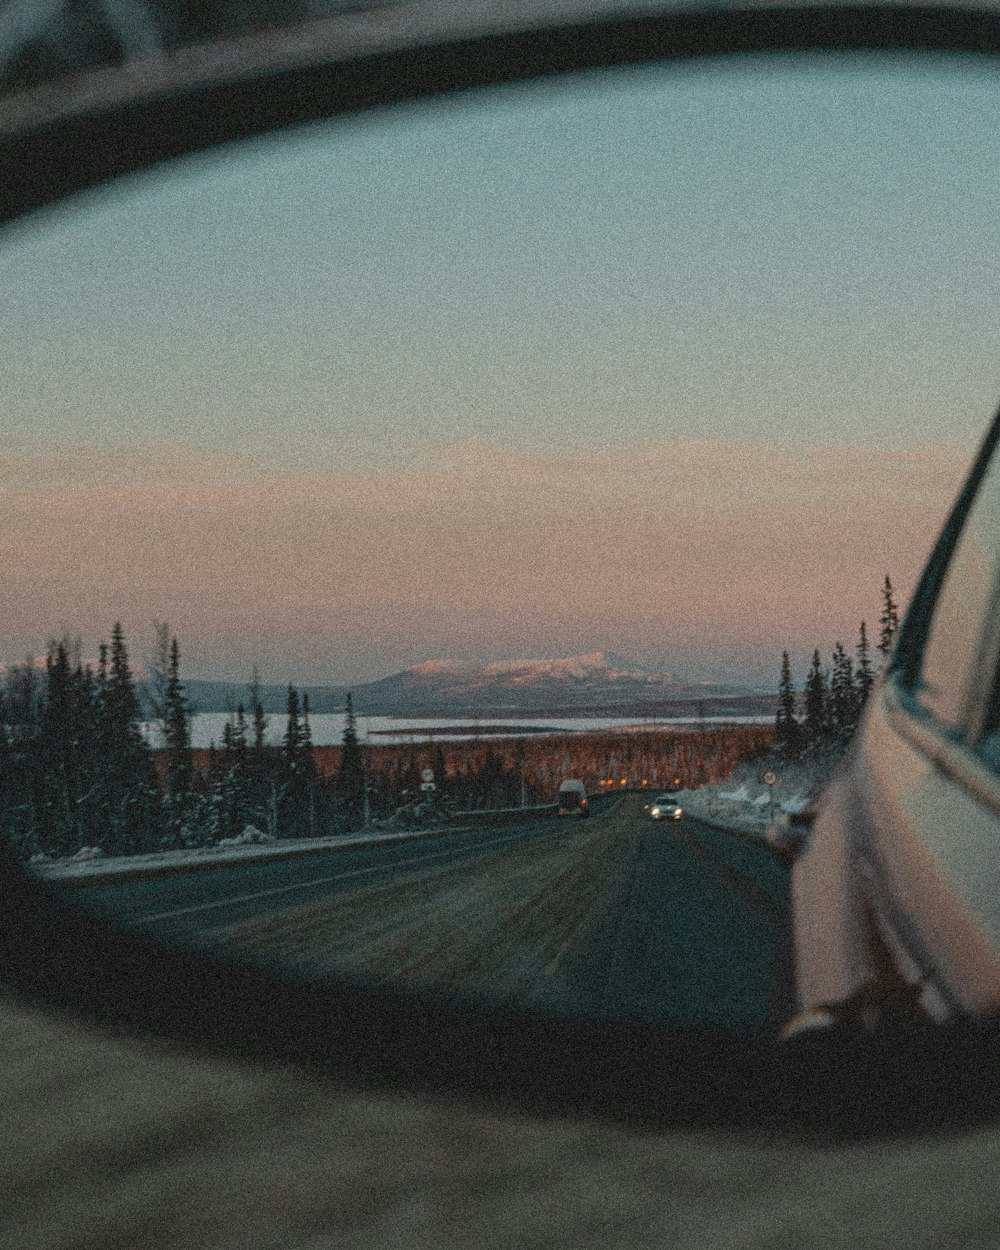 a car's side view mirror reflecting the sunset